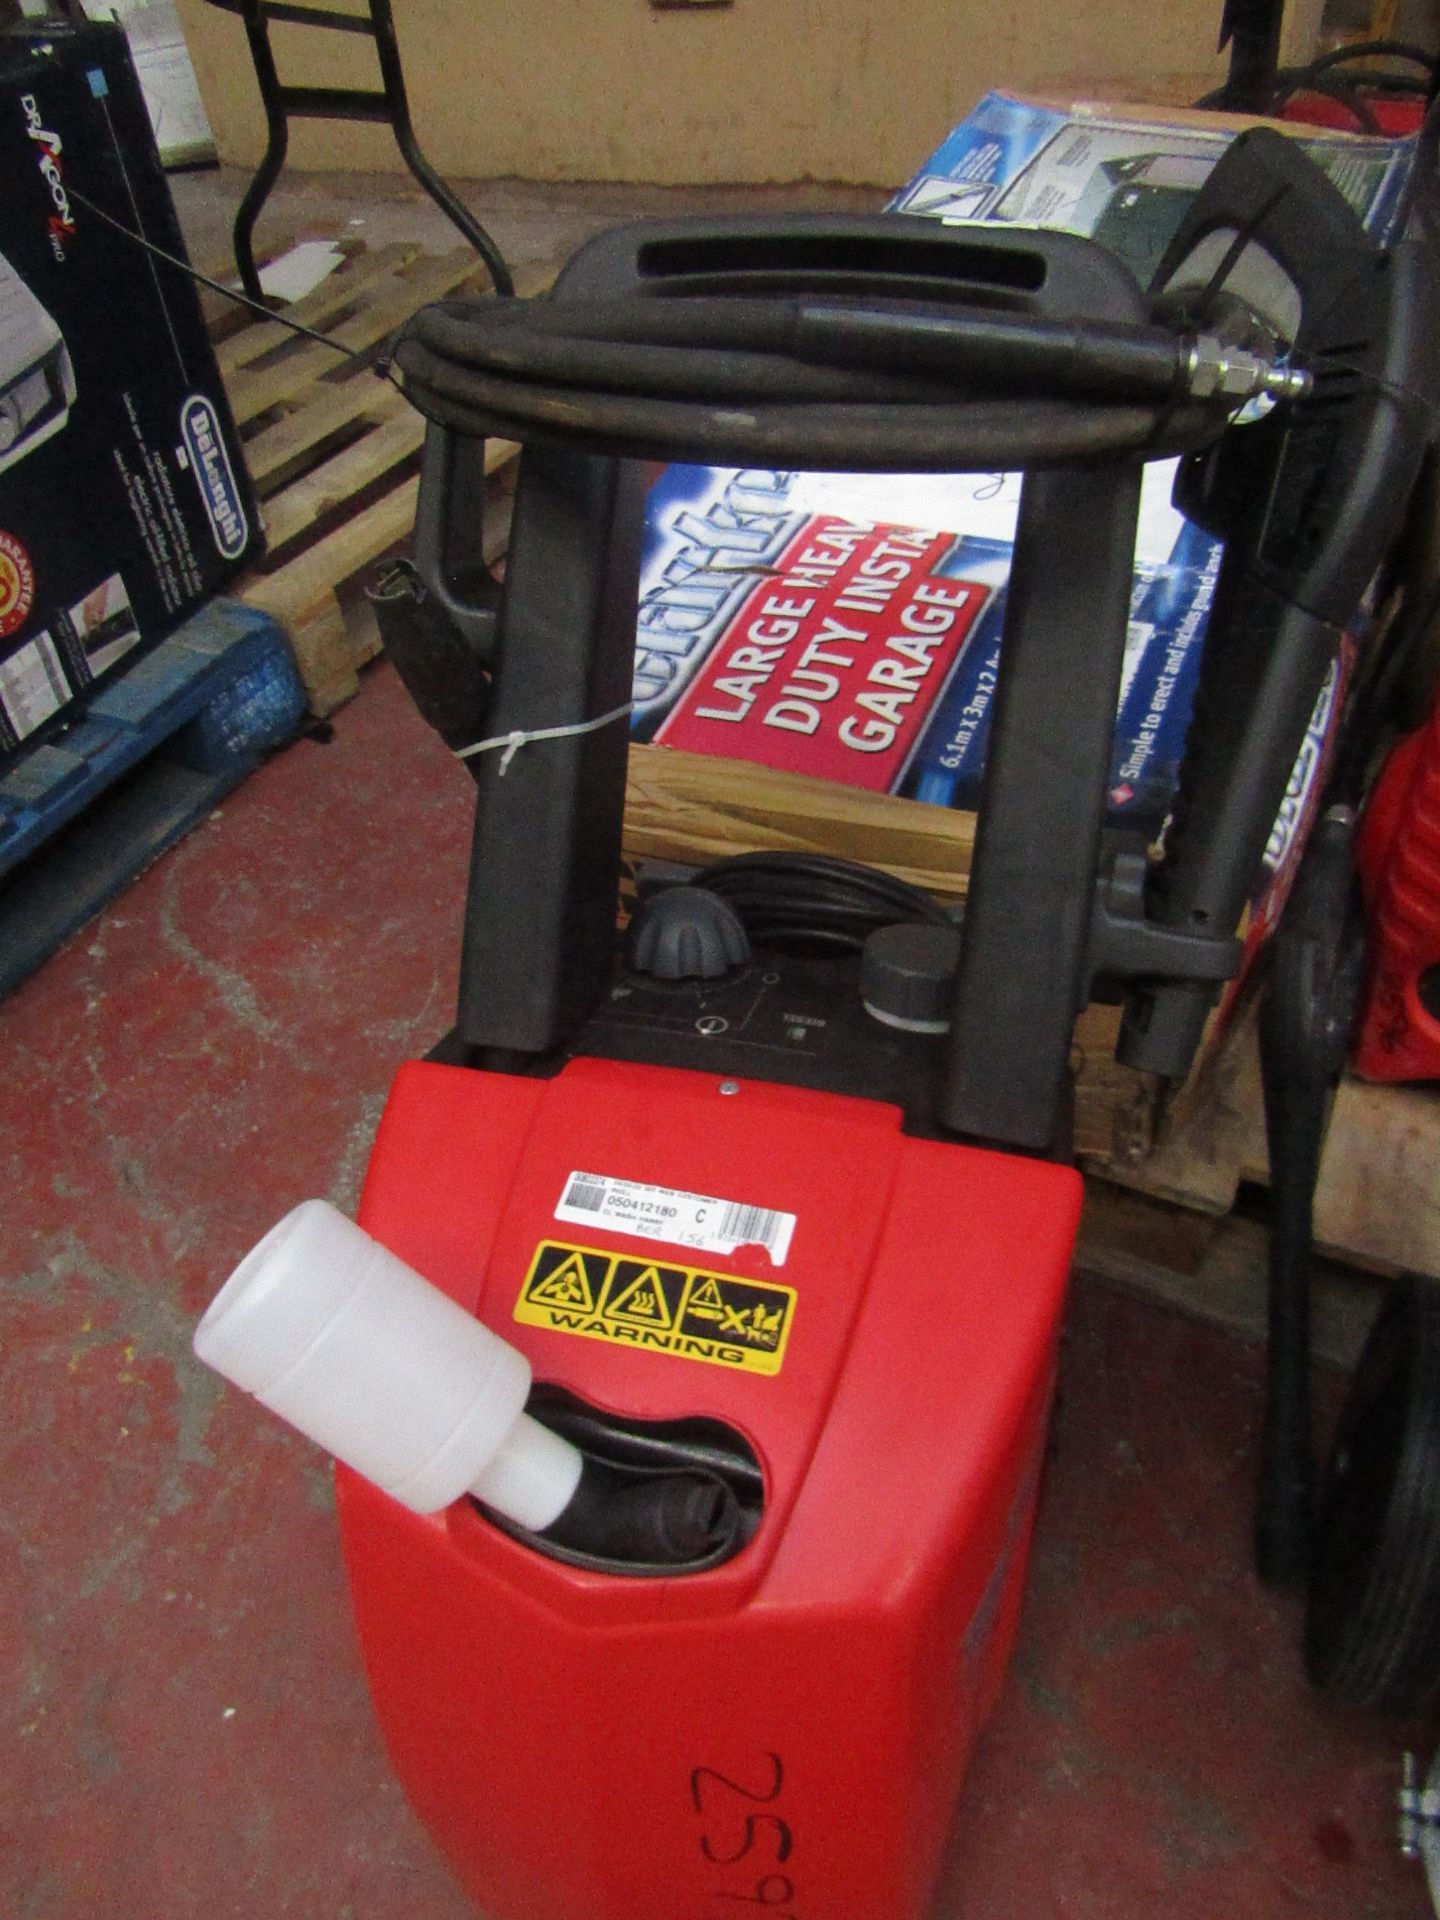 1x CL WASH HARRY 230V 2 2597 This lot is a Machine Mart product which is raw and completely